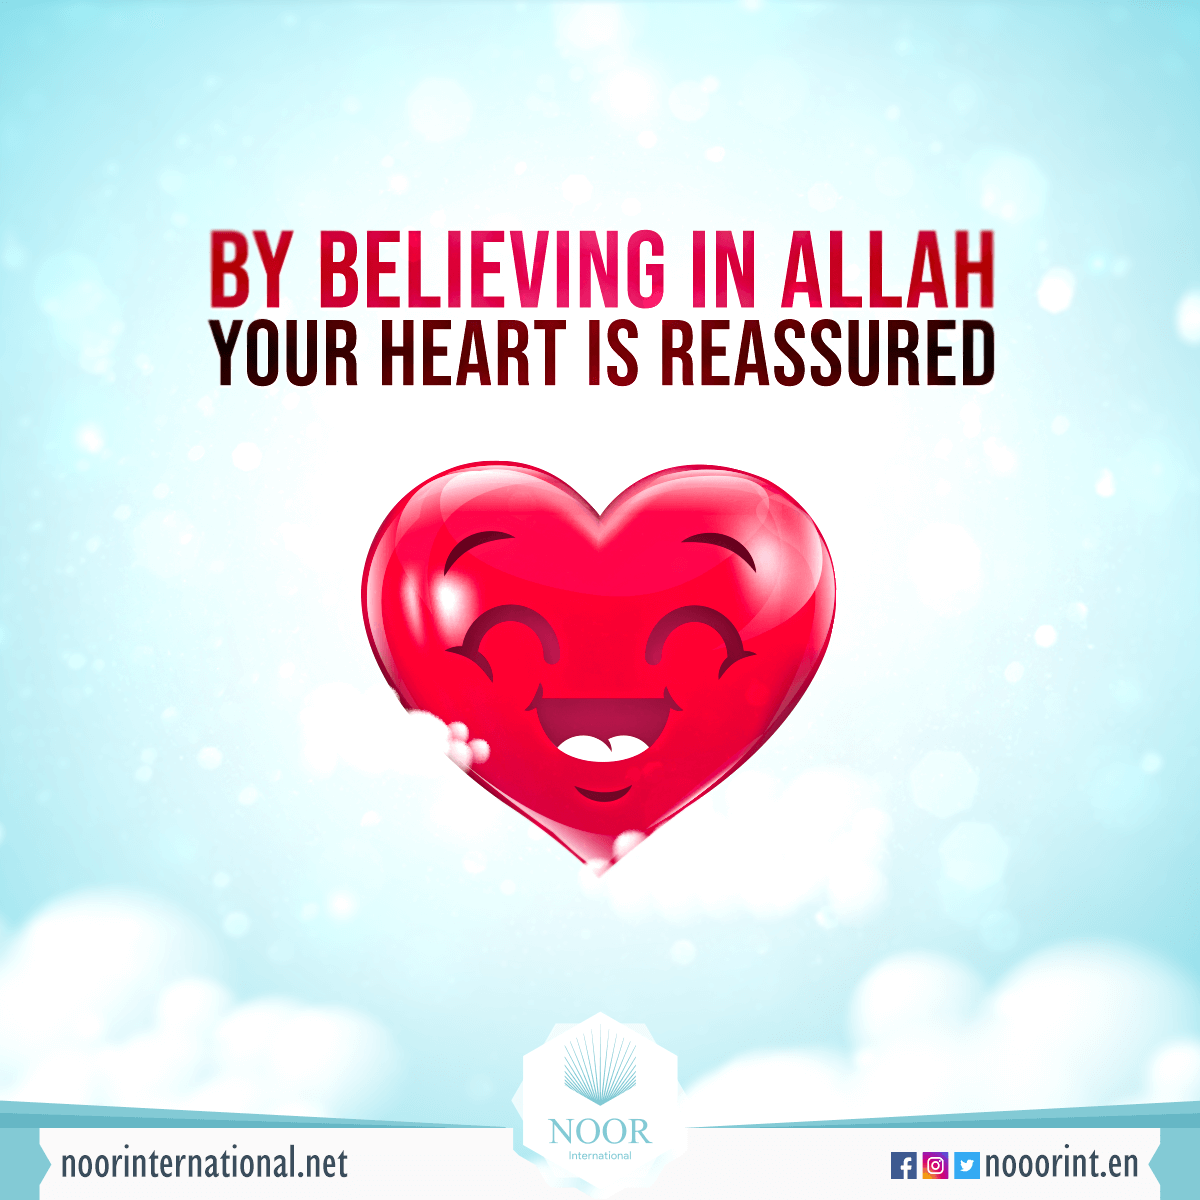 By believing in Allah, your heart is reassured